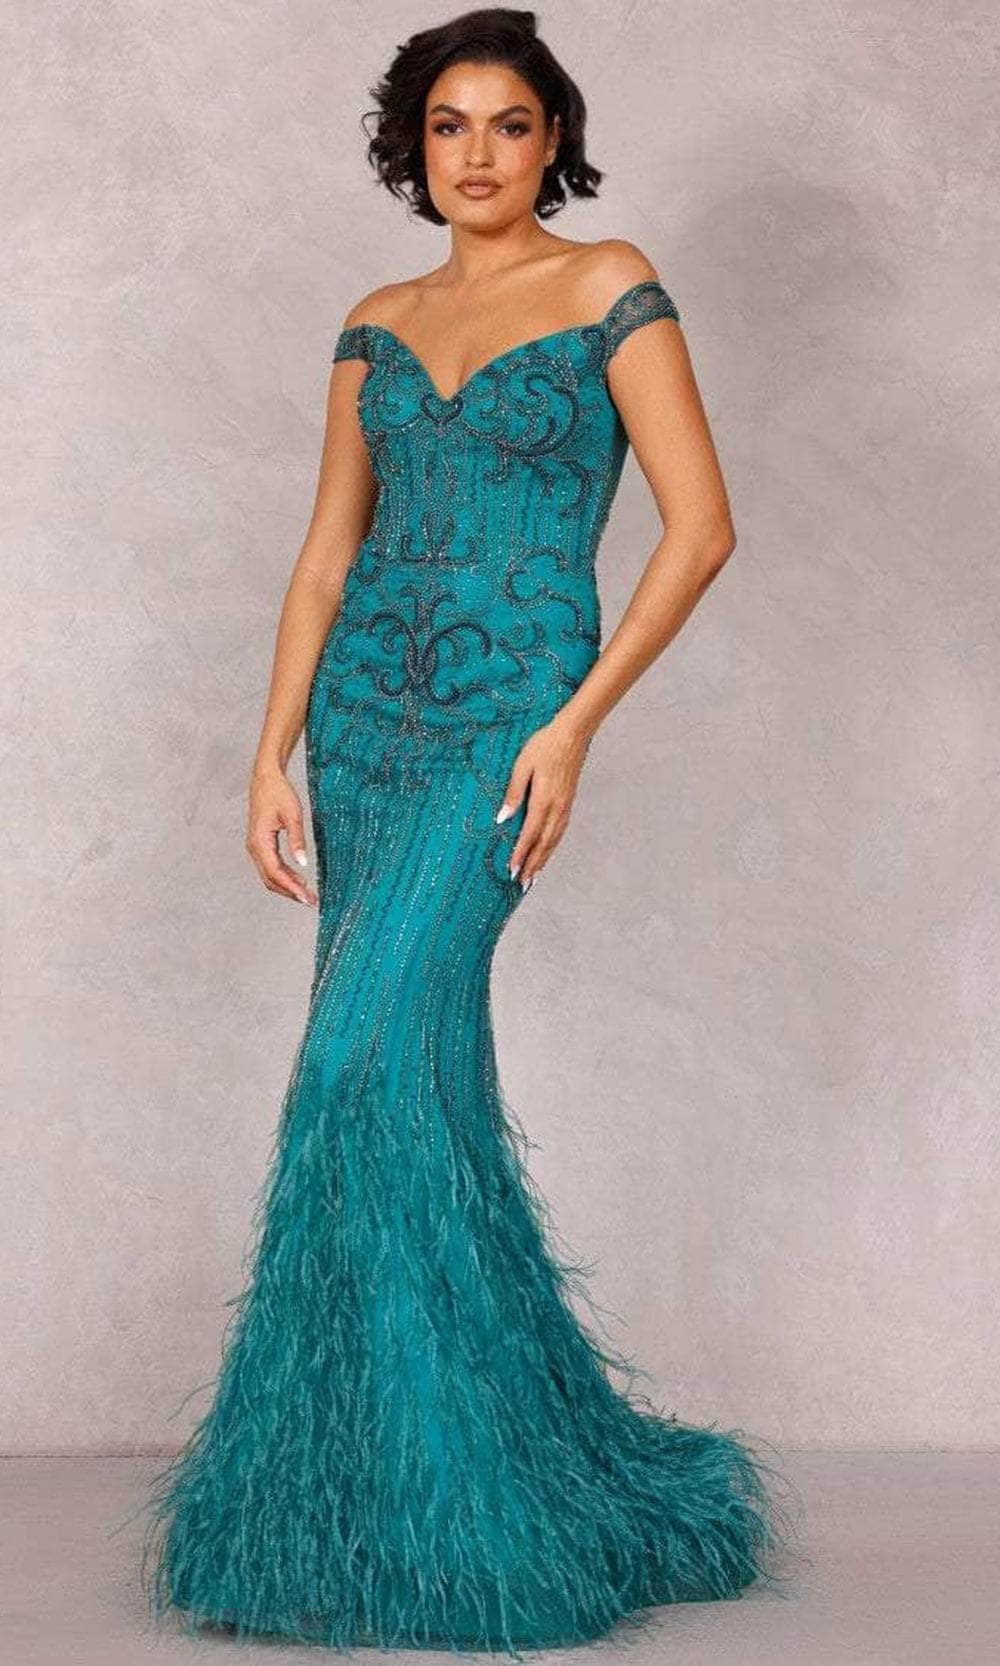 Terani Couture 2214GL0113 - Feather-Ornate Beaded Evening Dress
